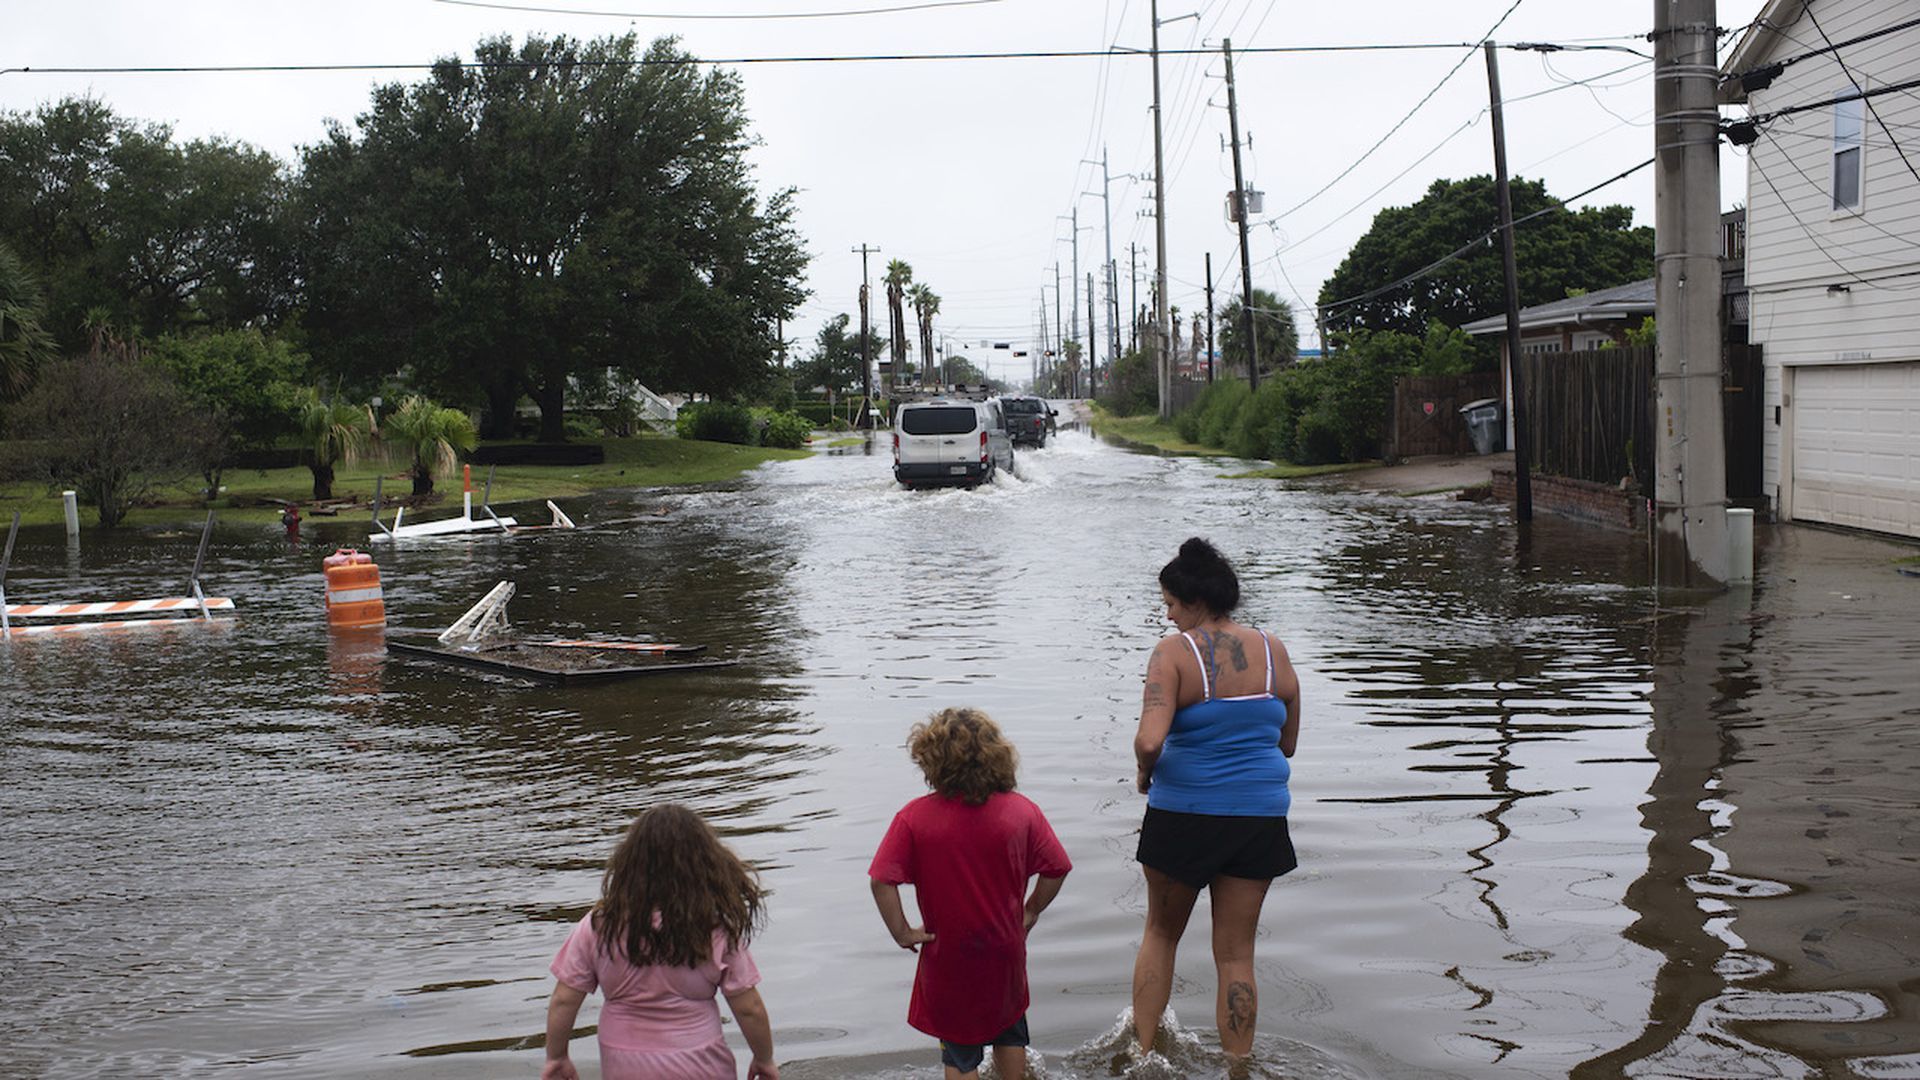 Zailey Segura, Zavery Segura and their mother Karen Smith wade through flood waters after Hurricane Nicholas landed in Galveston, Texas on September 14, 2021. Photo: Mark Felix/Getty Images